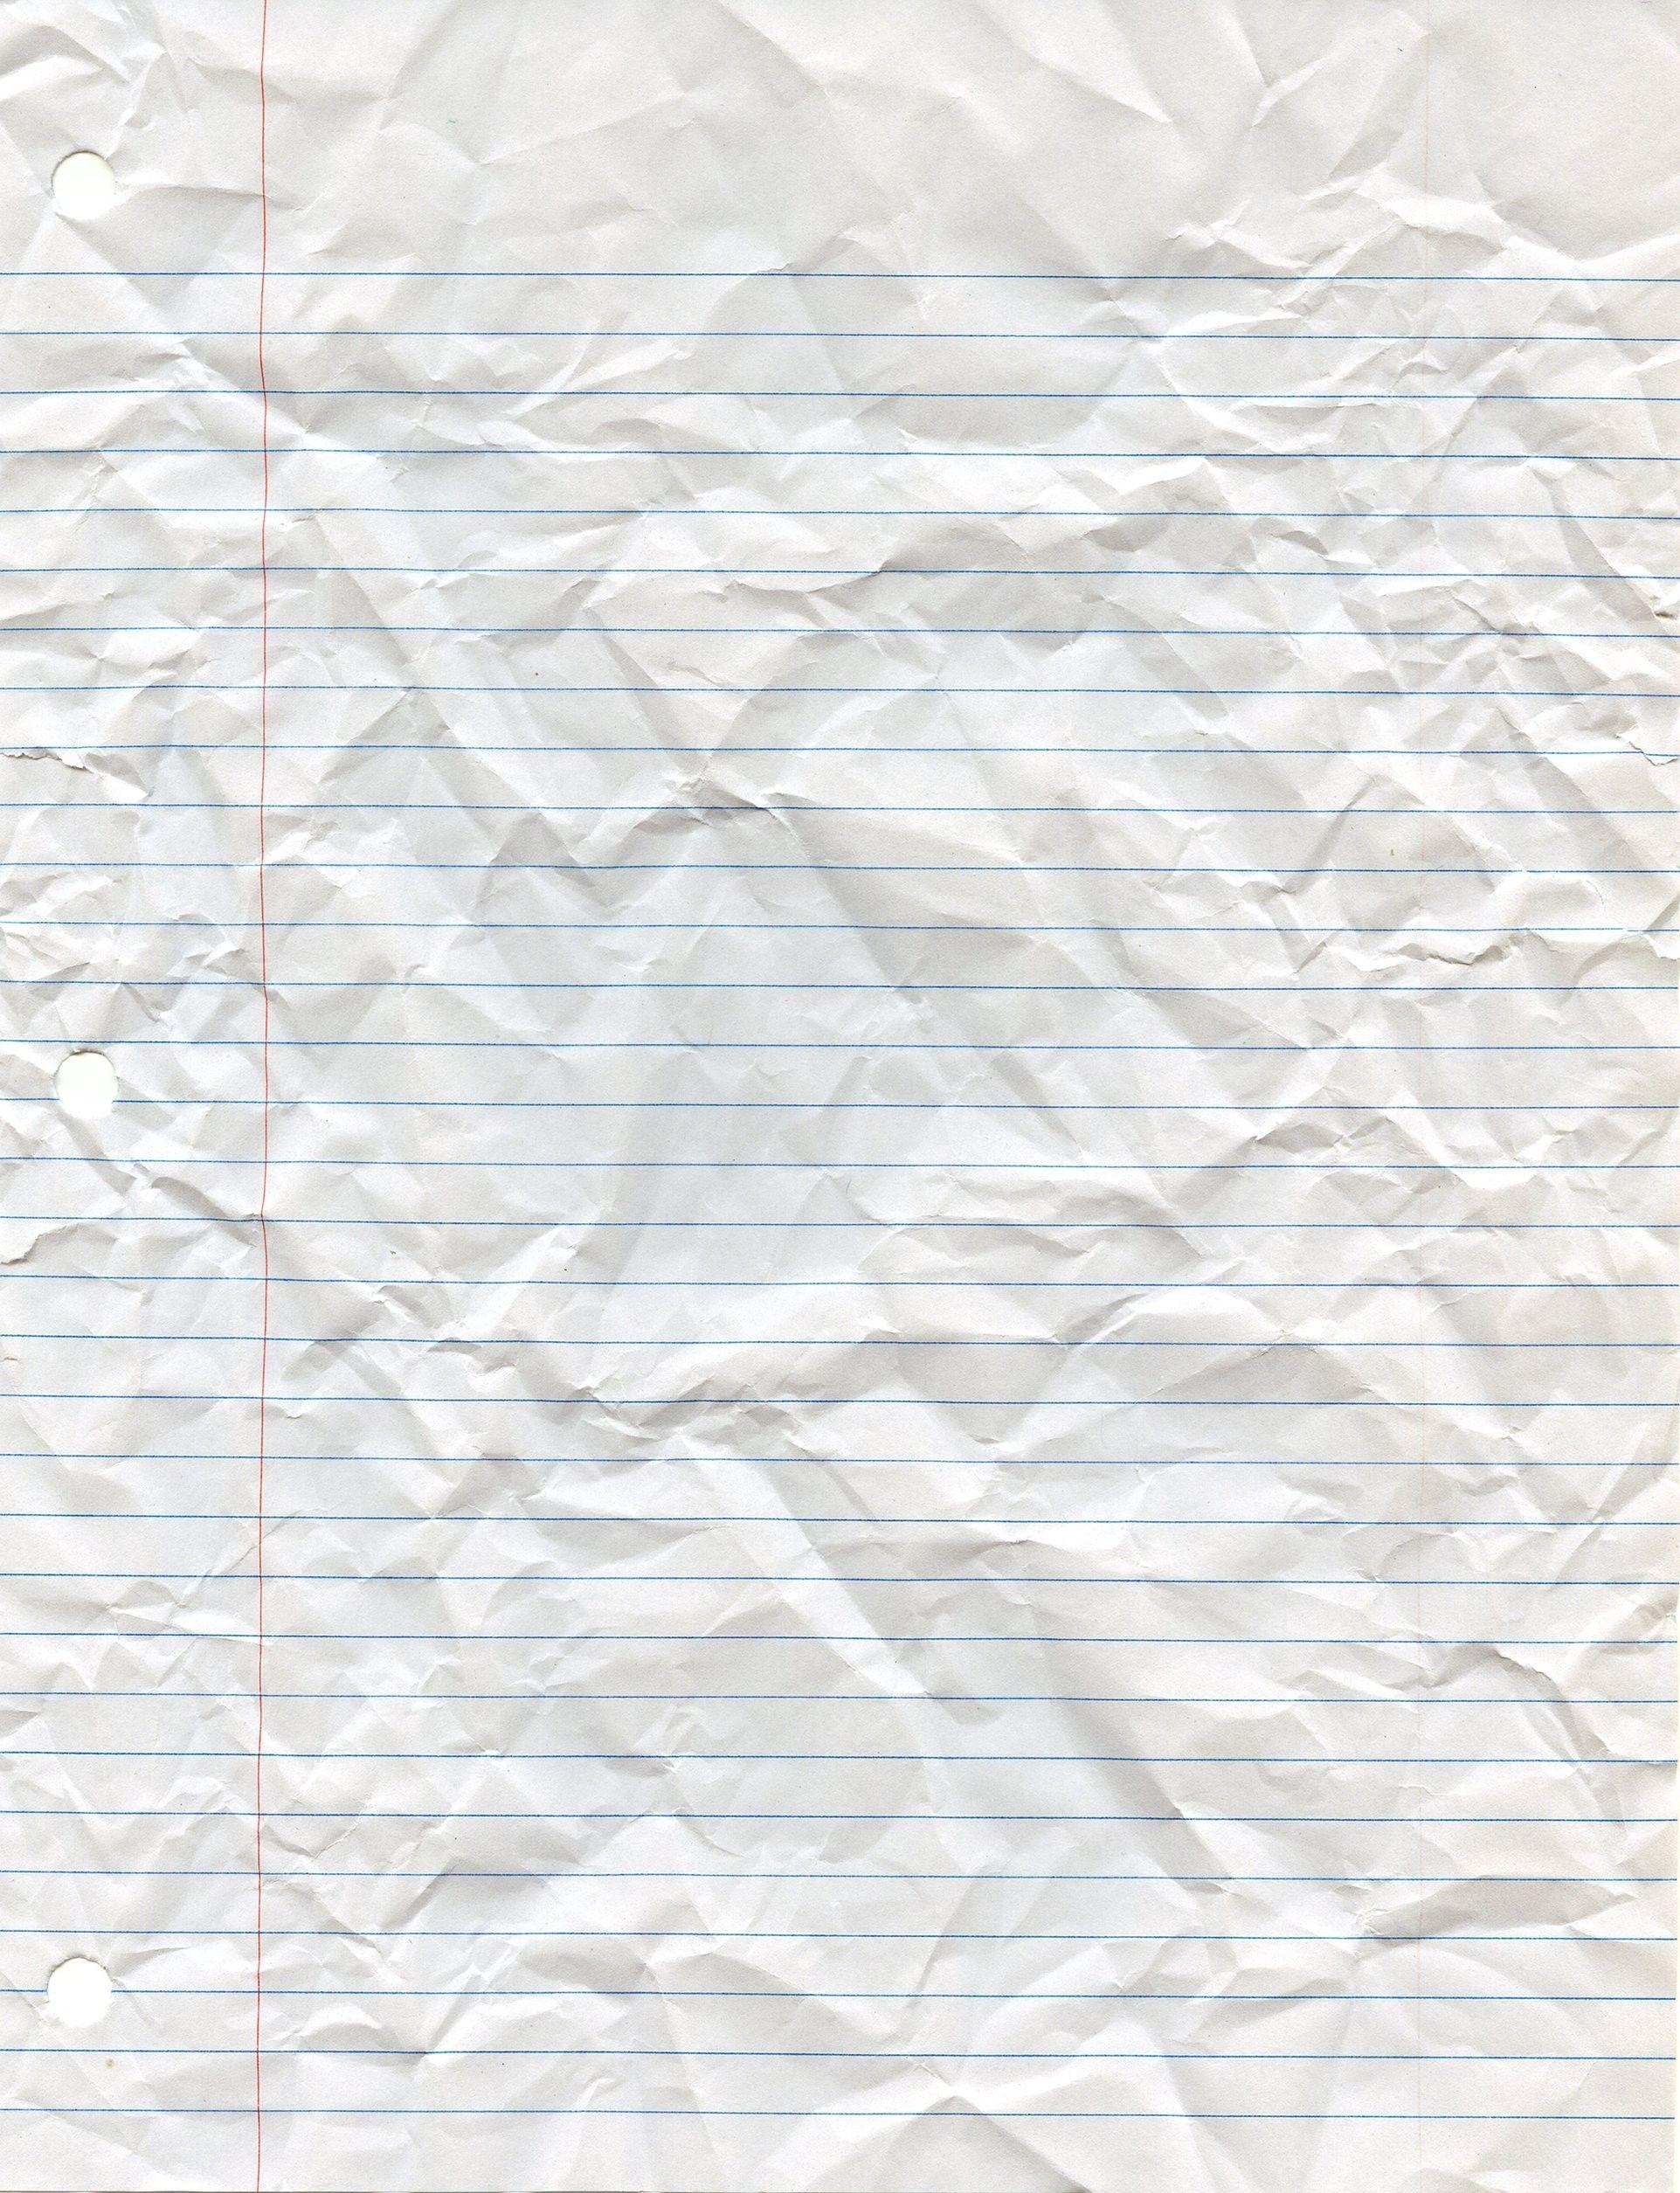 Lined Paper Wallpaper Free Lined .wallpaperaccess.com